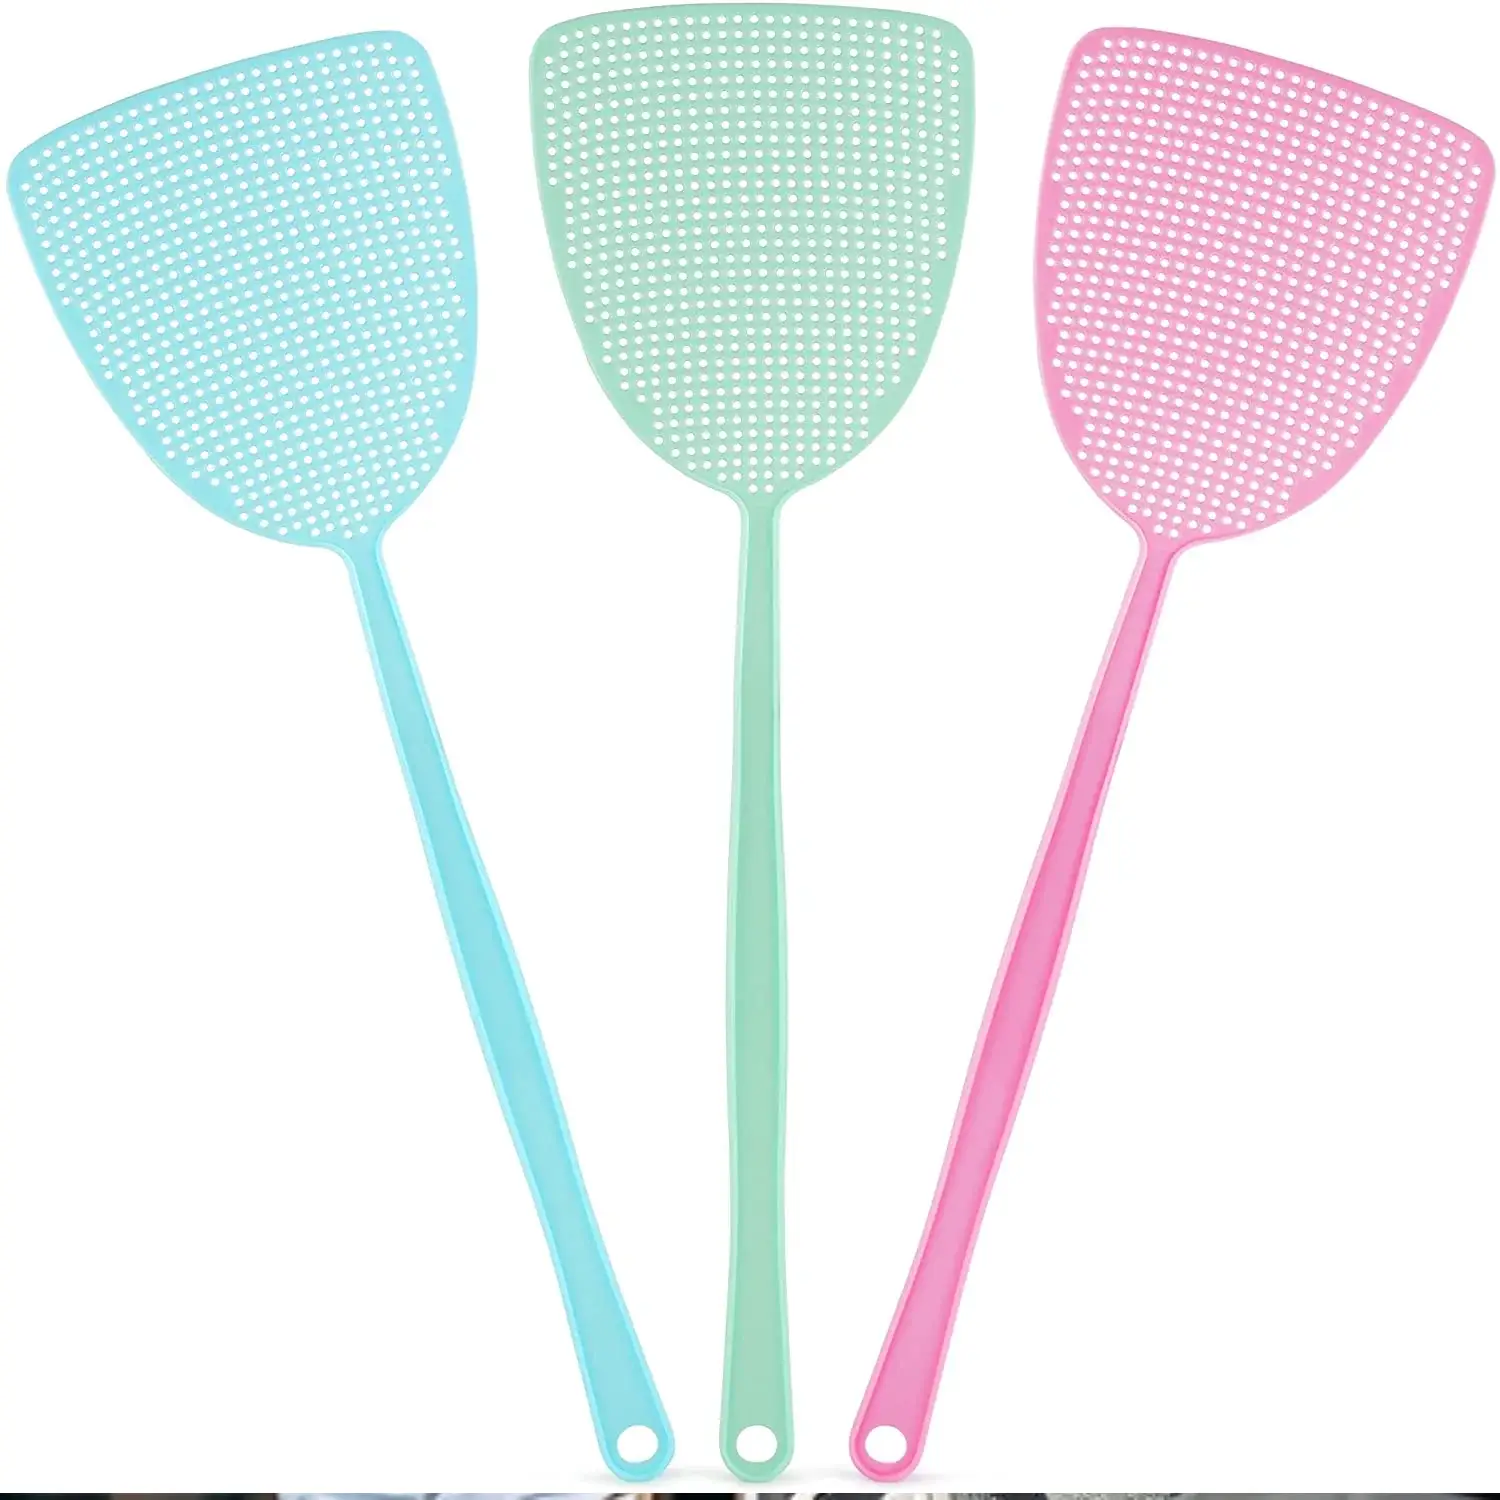 SC Fly Swatter - 3 pack Mulitcolor Plastic